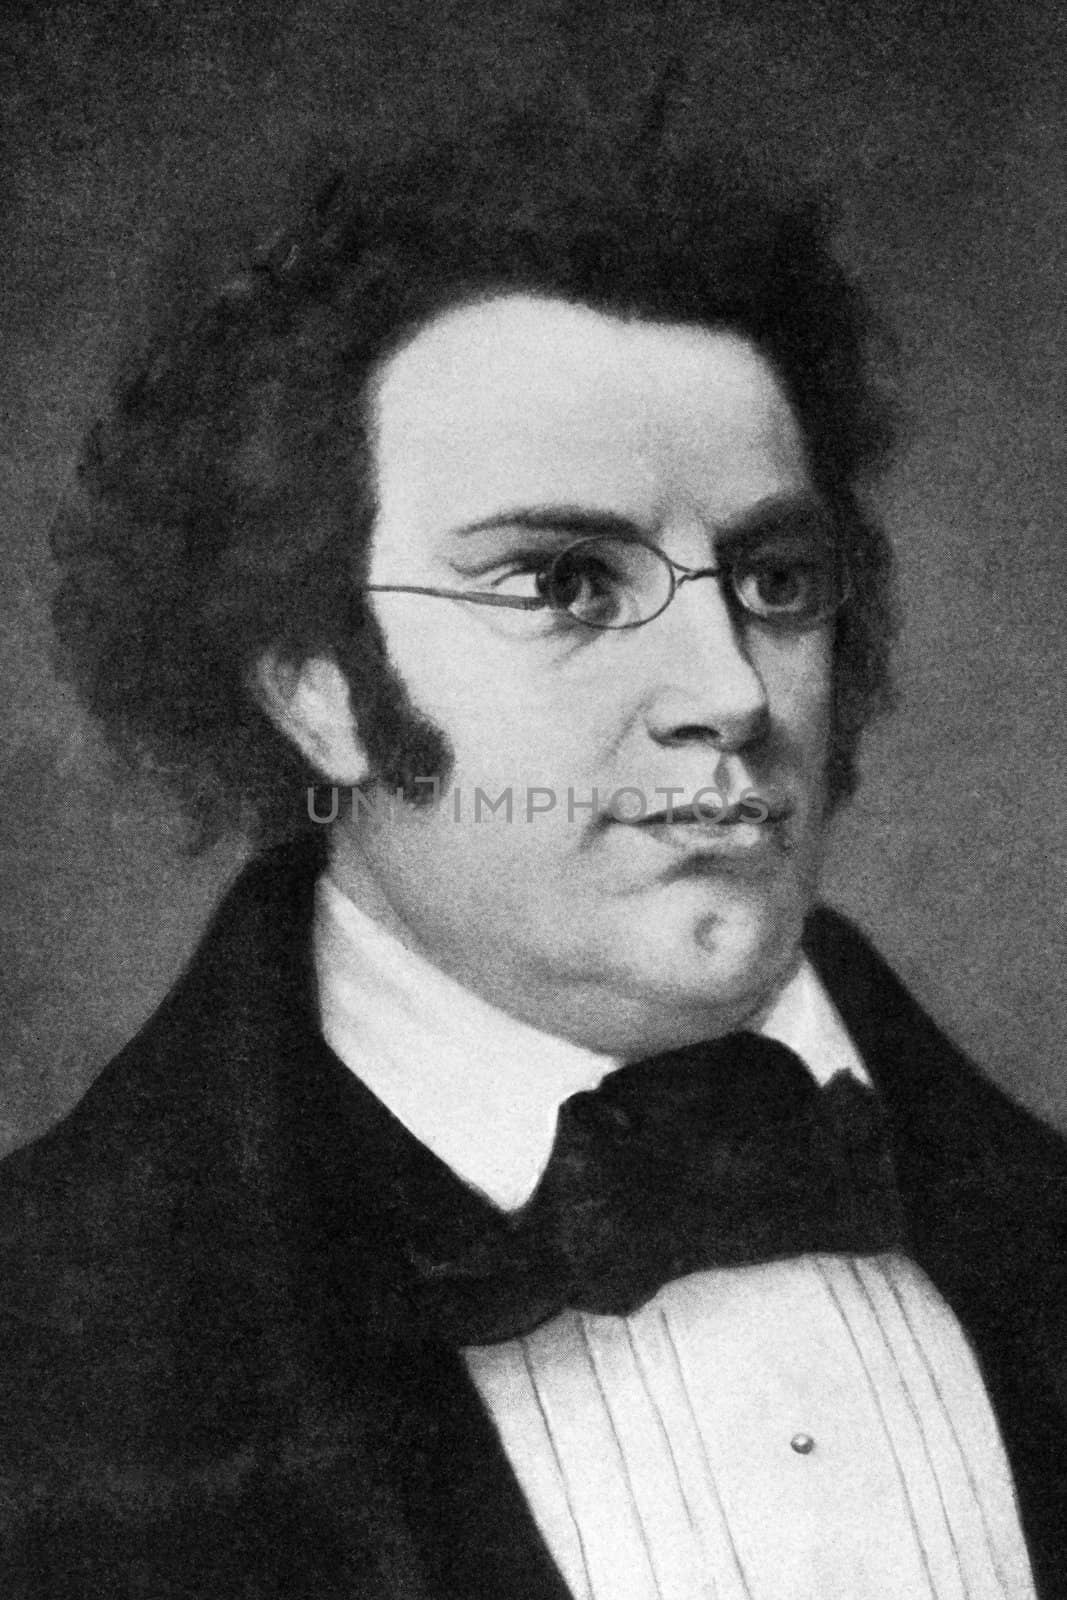 Franz Schubert (1797-1828) on engraving from 1908. Austrian composer. Engraved by unknown artist and published in "The world's best music, famous songs. Volume 6", by The University Society, New York,1908.